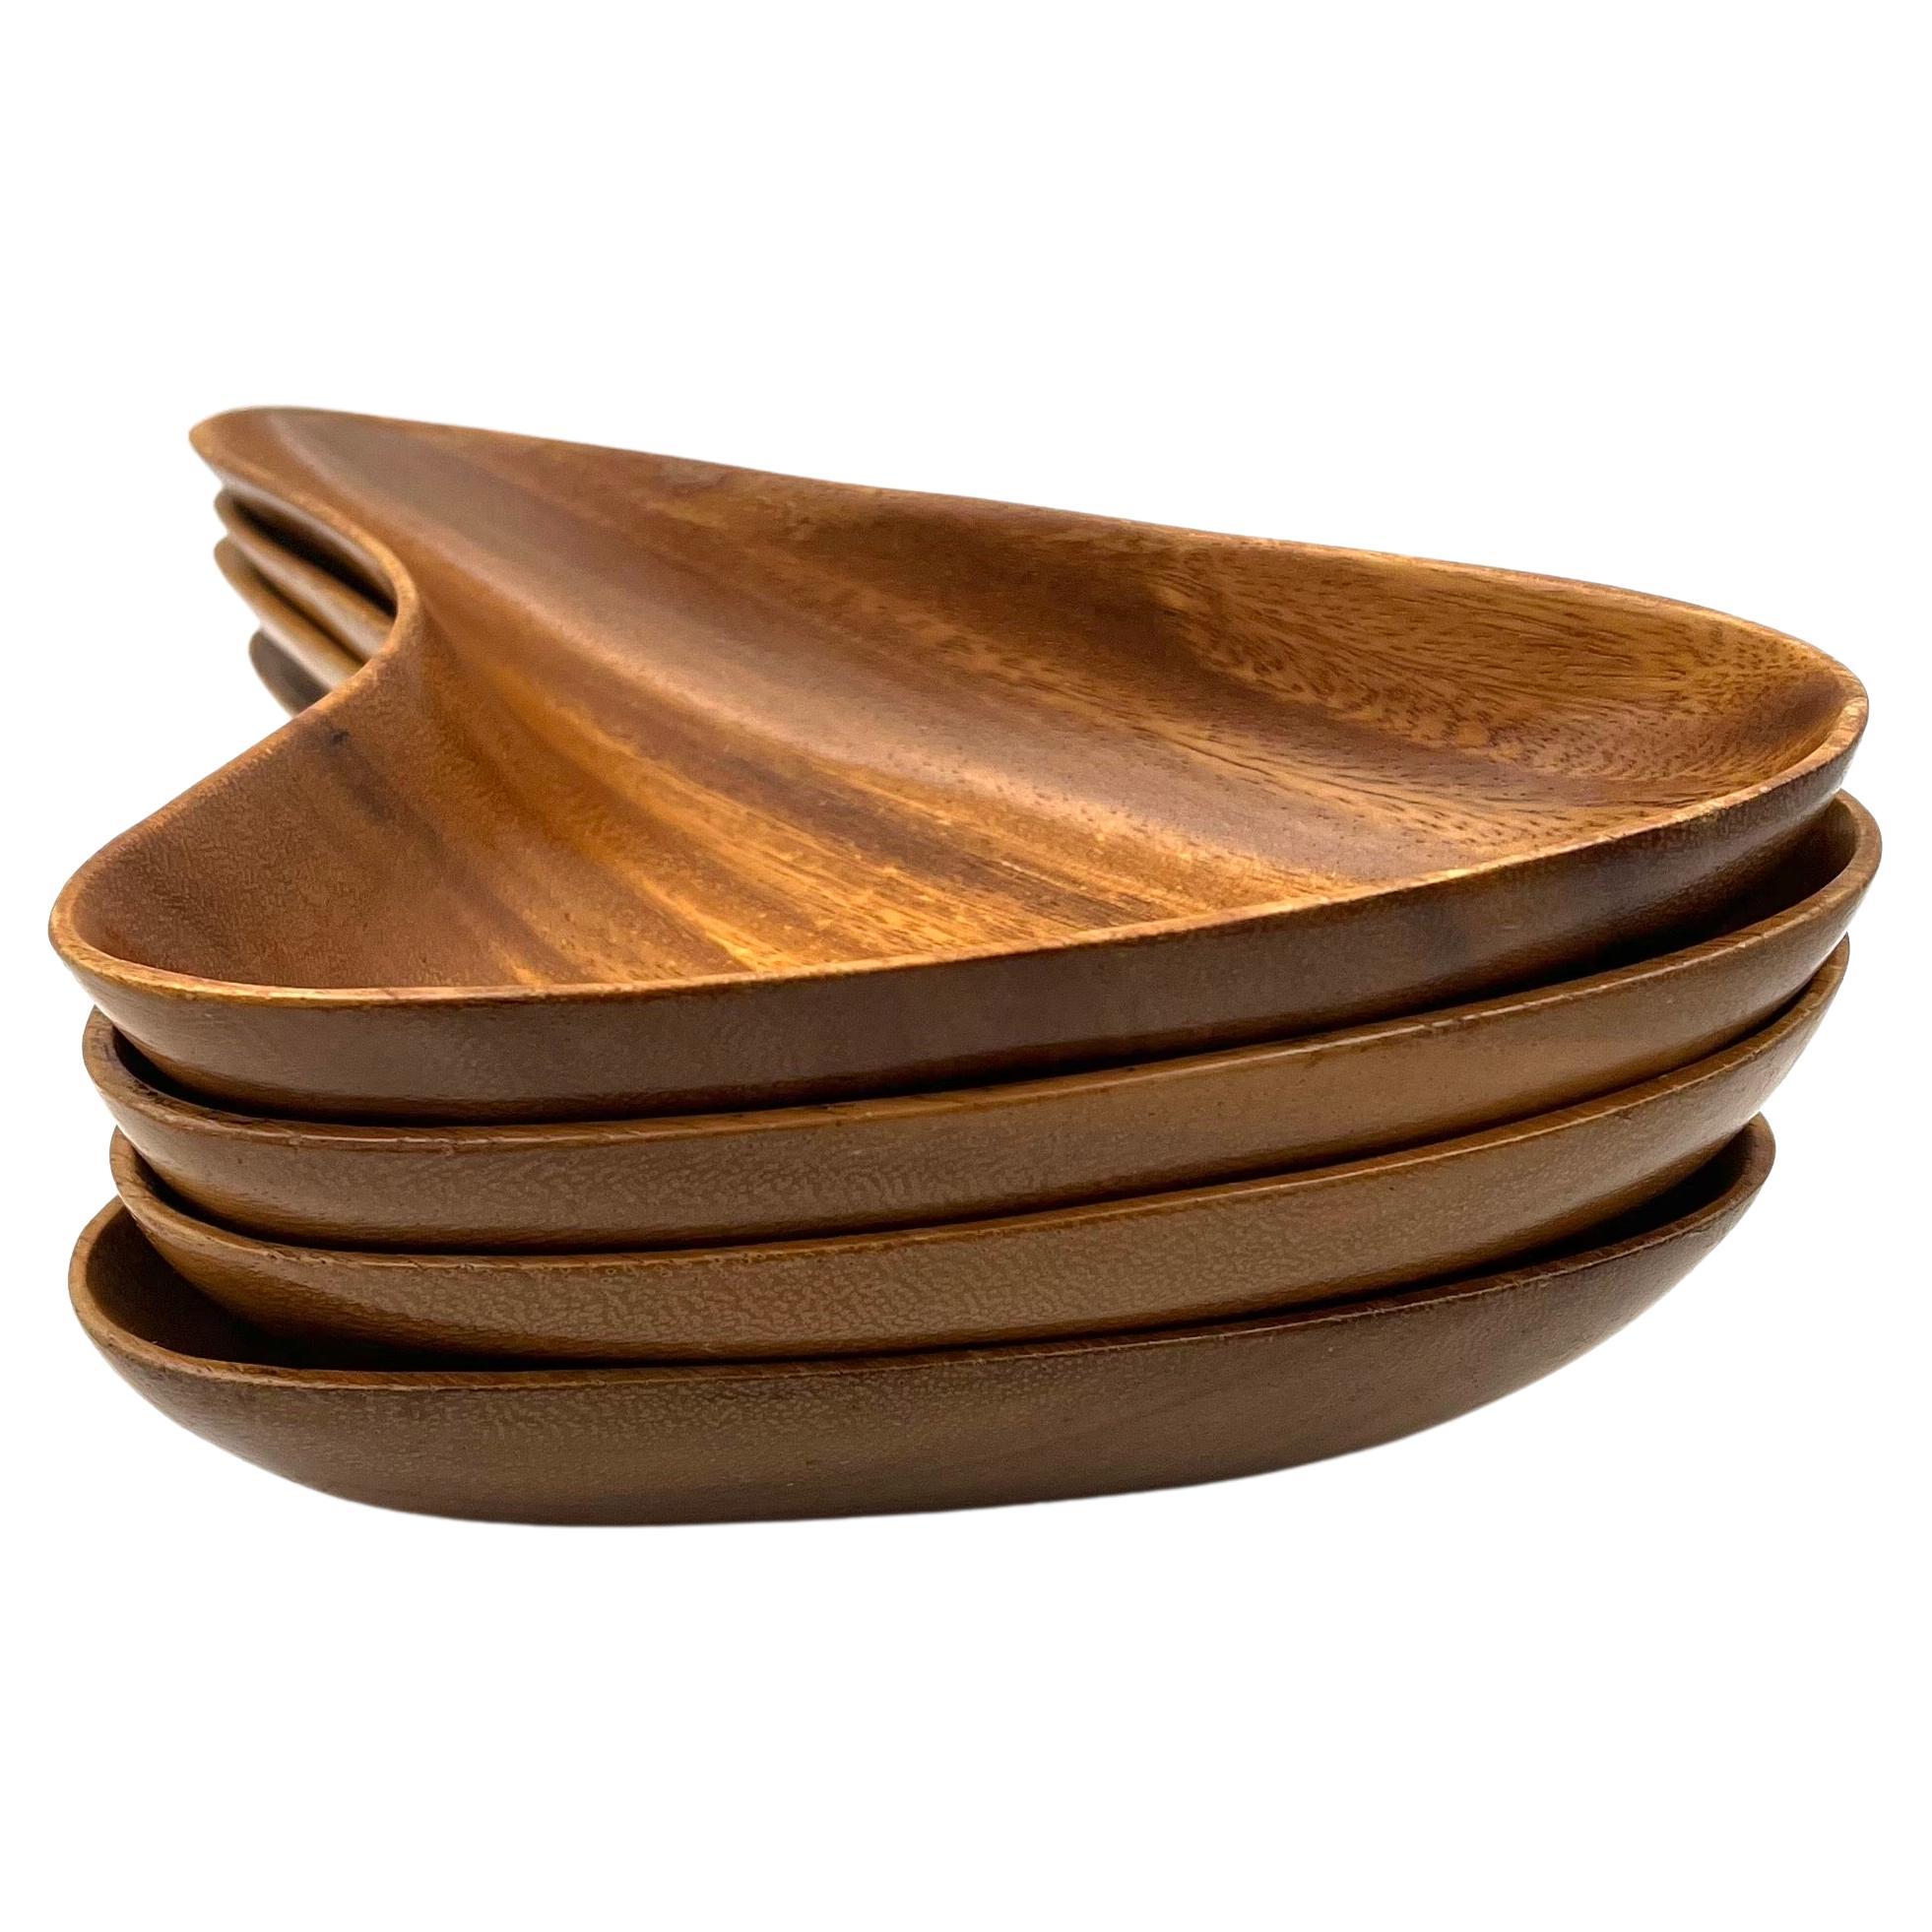 Nice set of 4 snack serving bowls in the style of Don Shoemaker. Solid palm wood versatile, and great for parties.